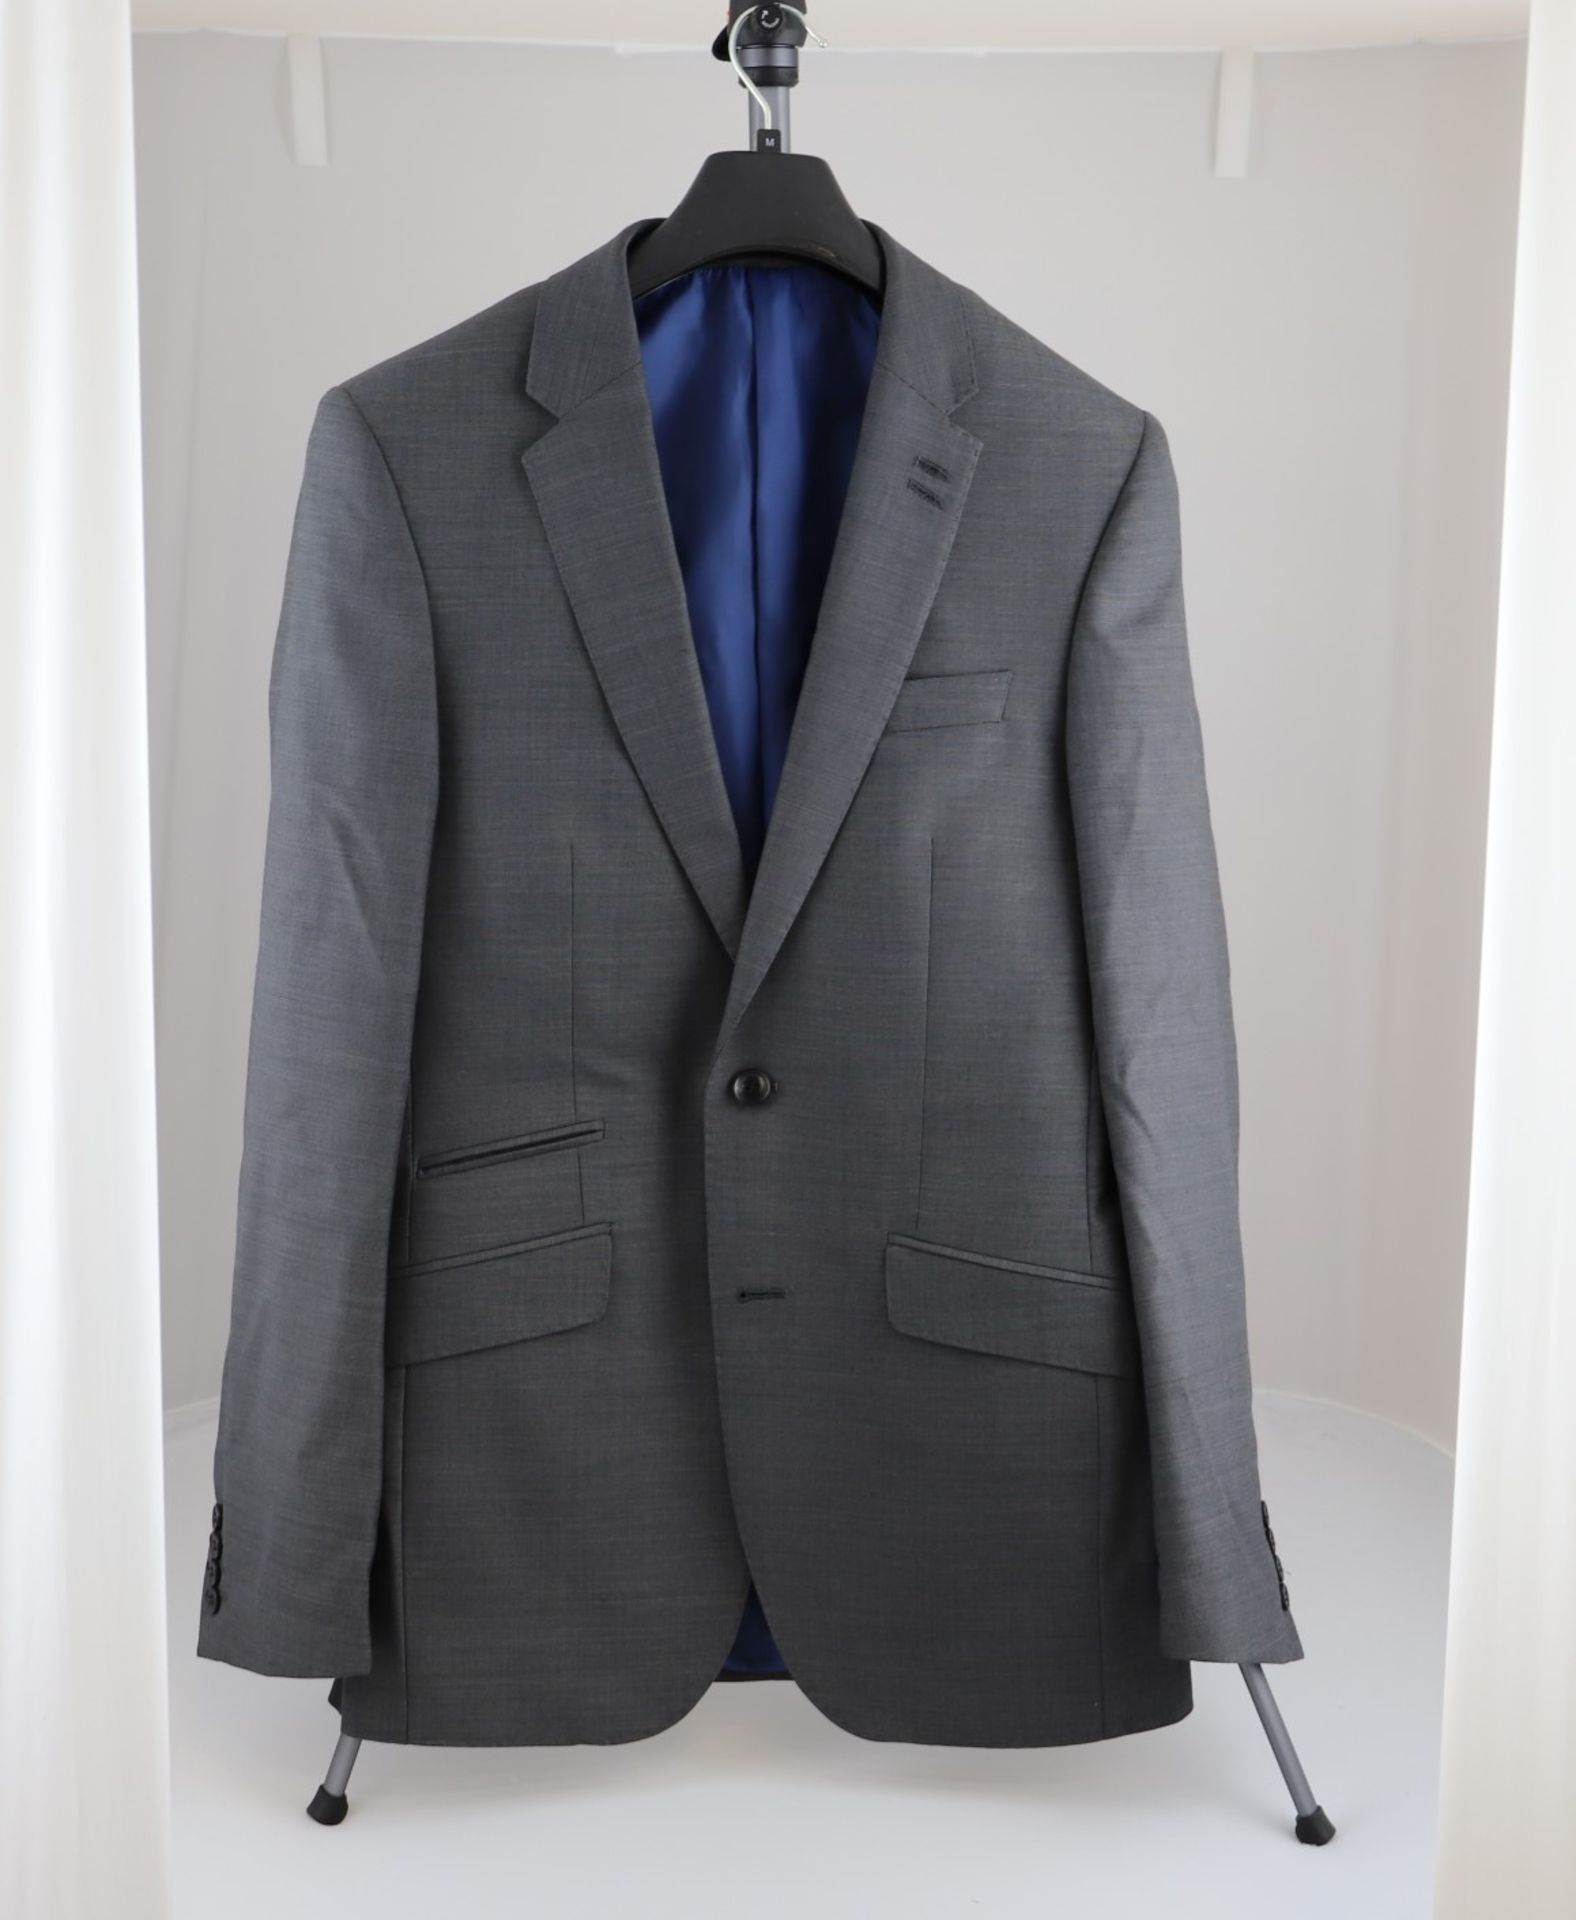 1 x mixed pallet = 99 items of Grade A Marks and Spencer Menswear Clothing. Approx Total RRP £8,100